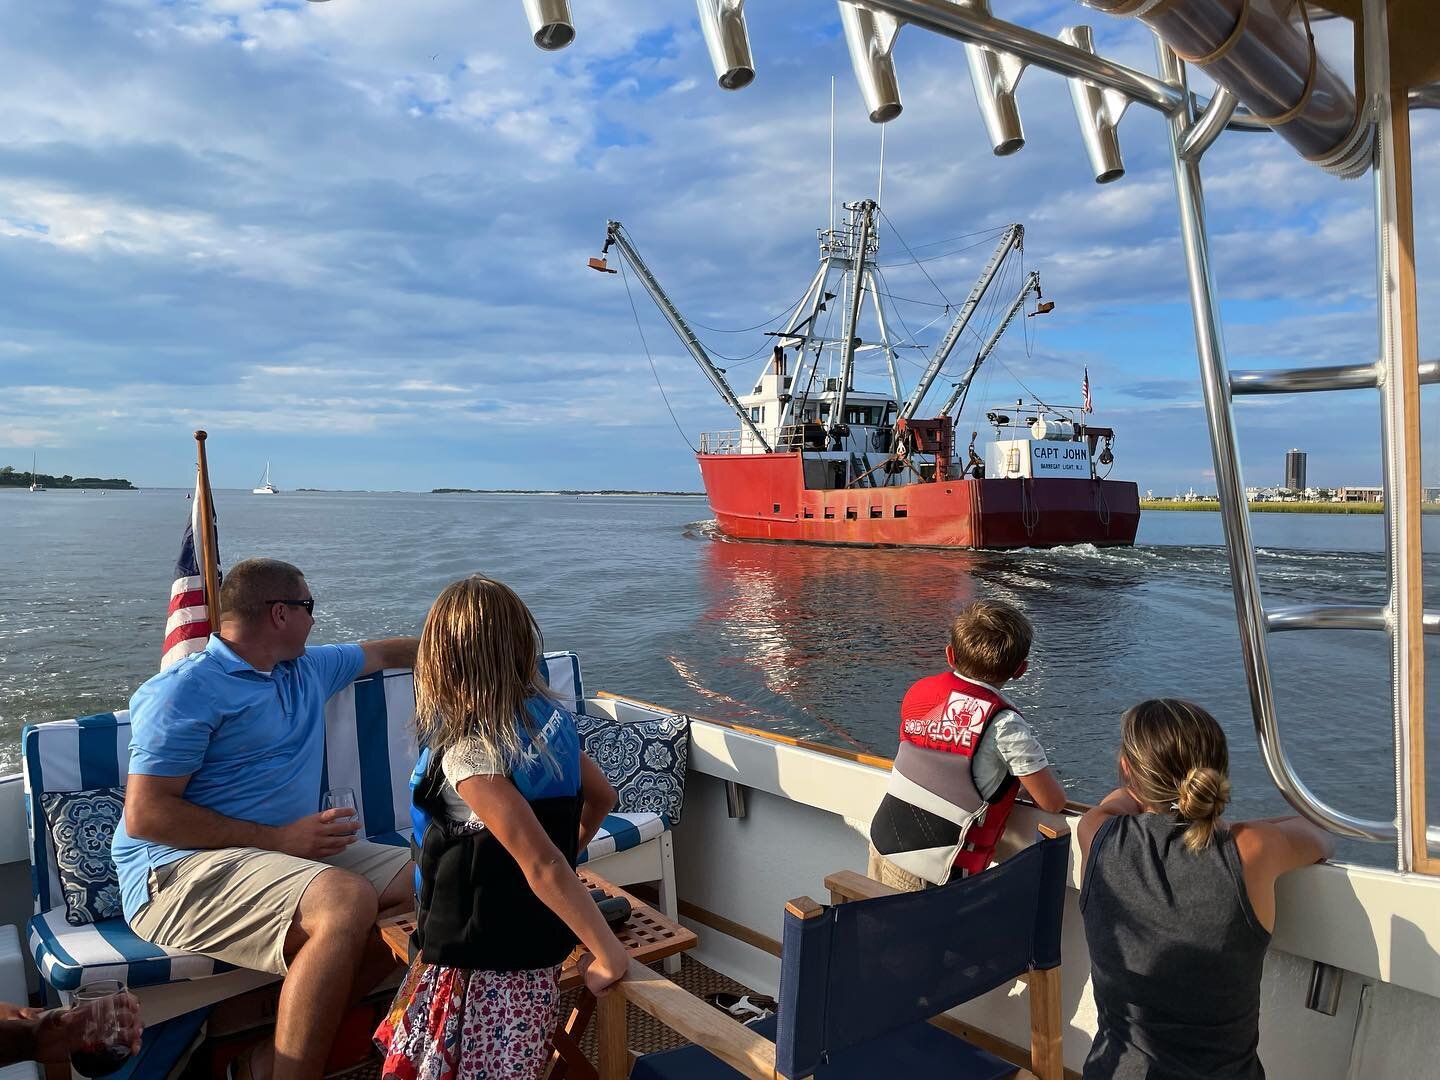 F/V Capt John giving us a toot toot 🛟as they head out on a day trip for Sea Scallops. One of the many cool items we came upon this evening! 

Still some days left for summer 2022. Reach out today to claim your spot. 

#haveabayday #barnegatlight #lb